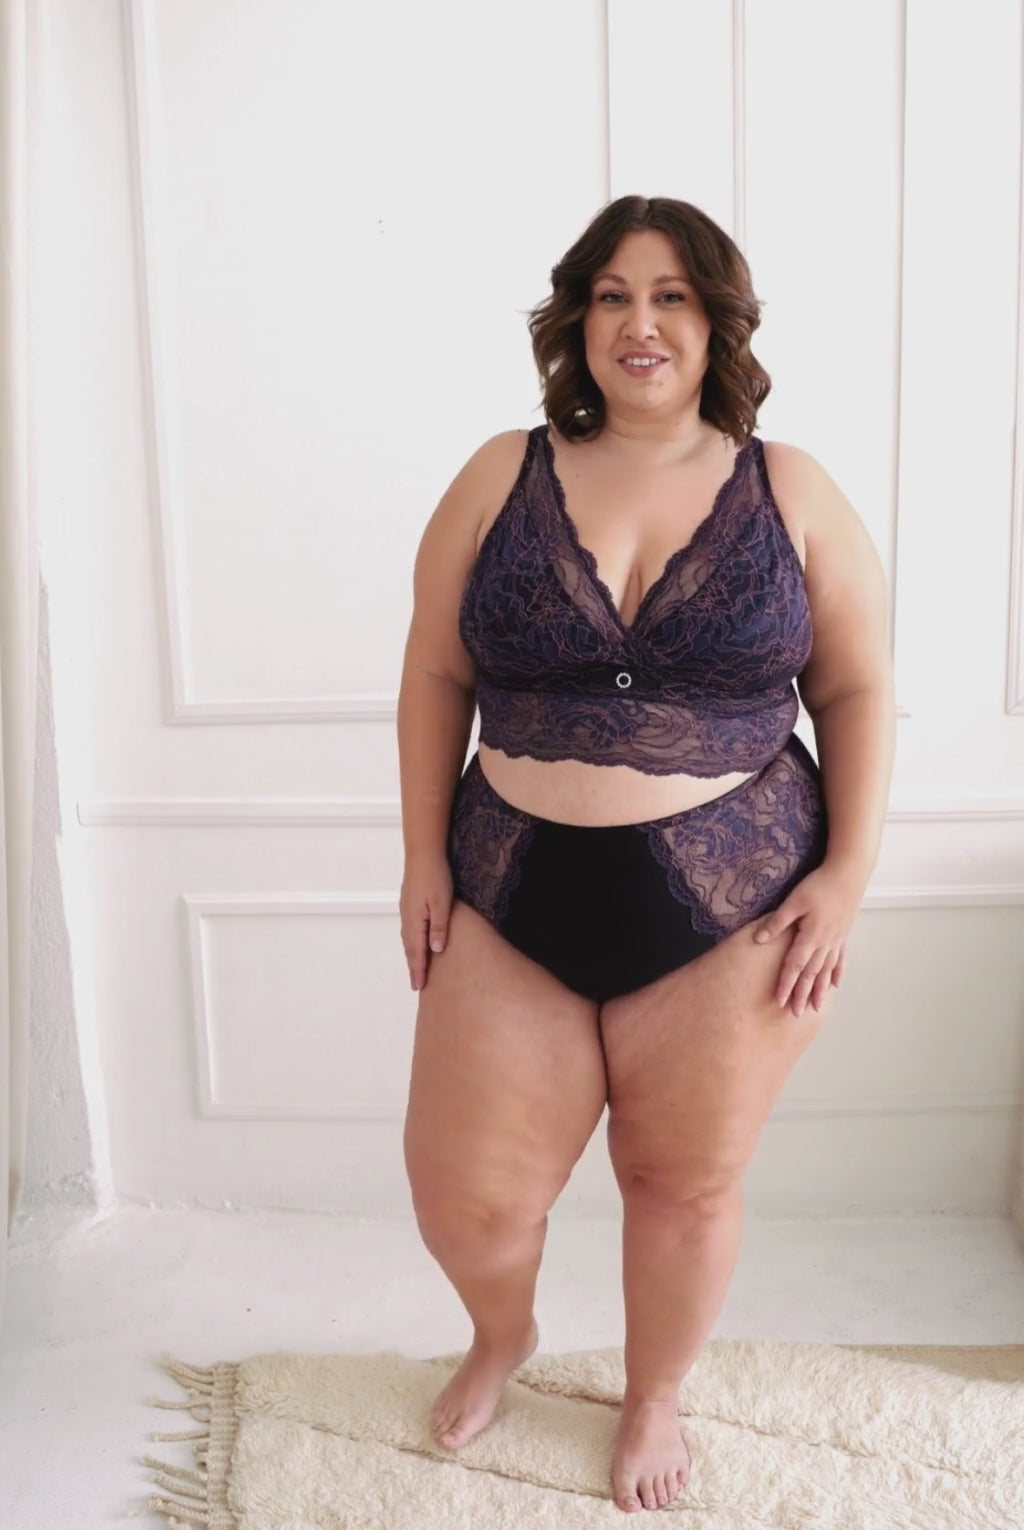 NEW Performance Lace™ Long Line Bra ~ NIKKI - Full Cup